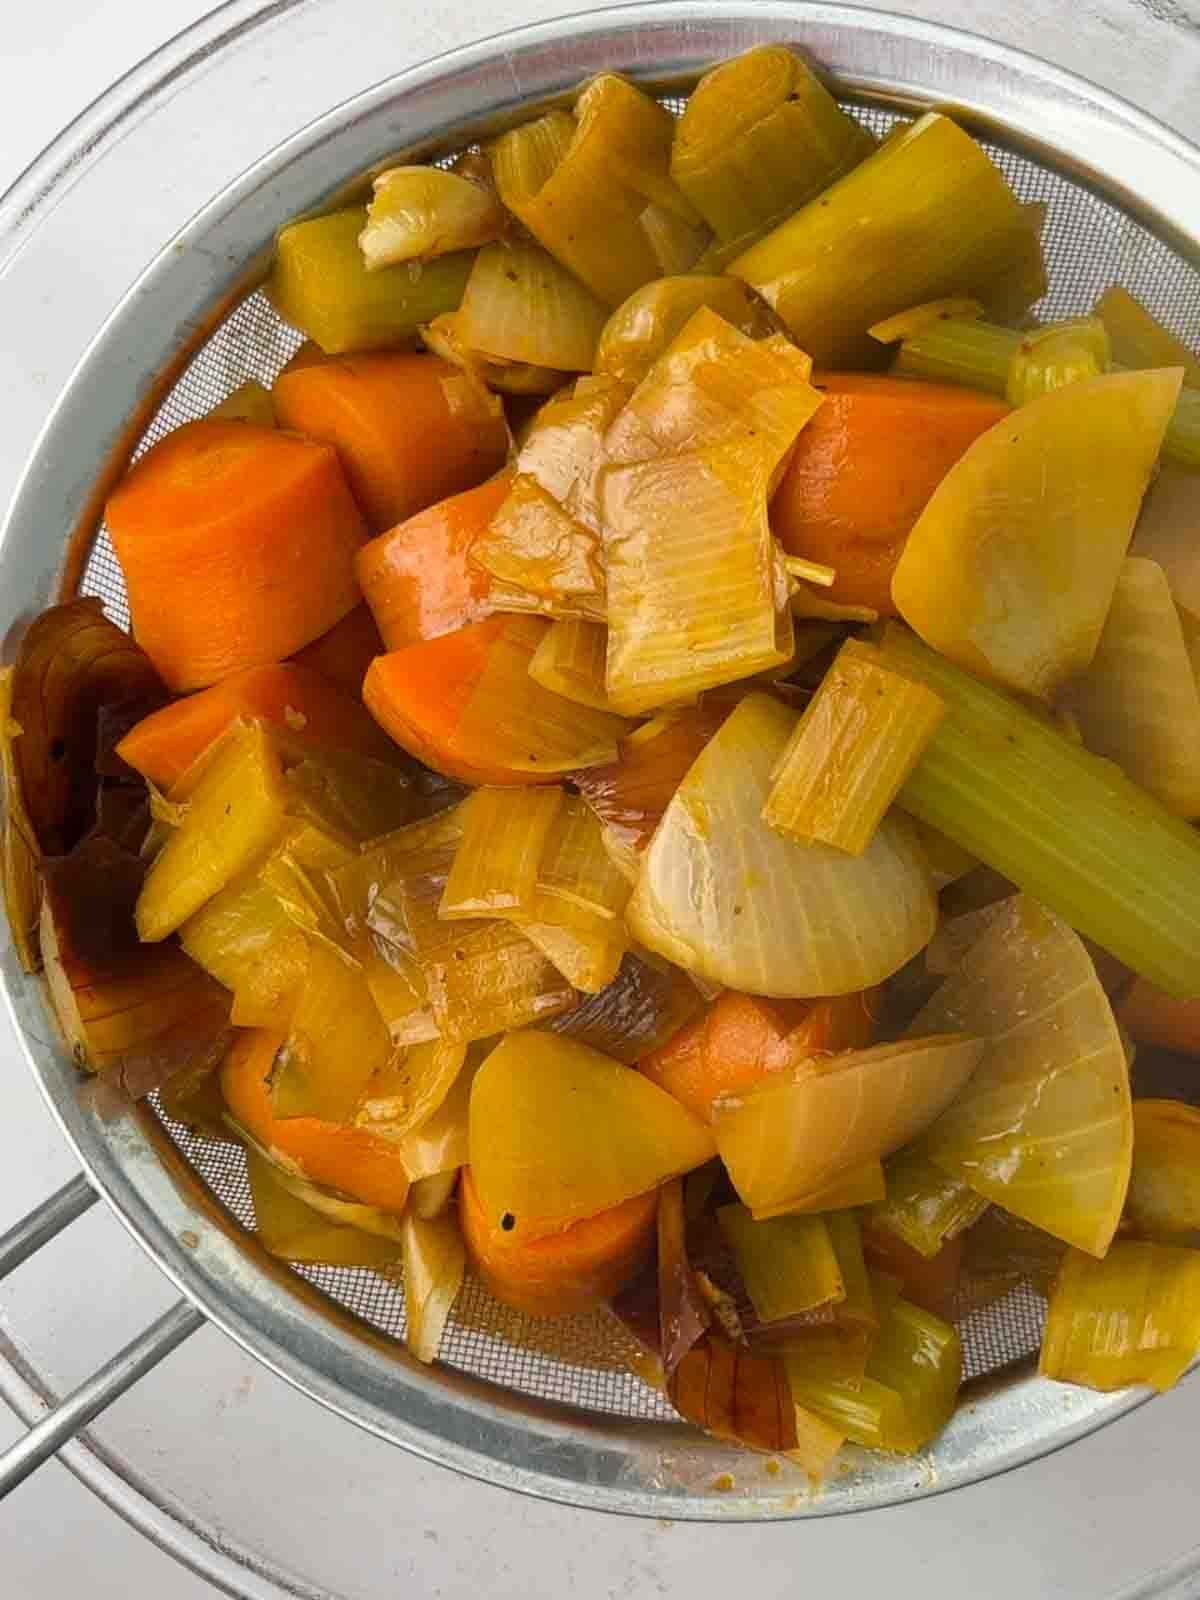 Cooked vegetables in a strainer over a bowl for step 3 in the recipe for vegetarian gravy.